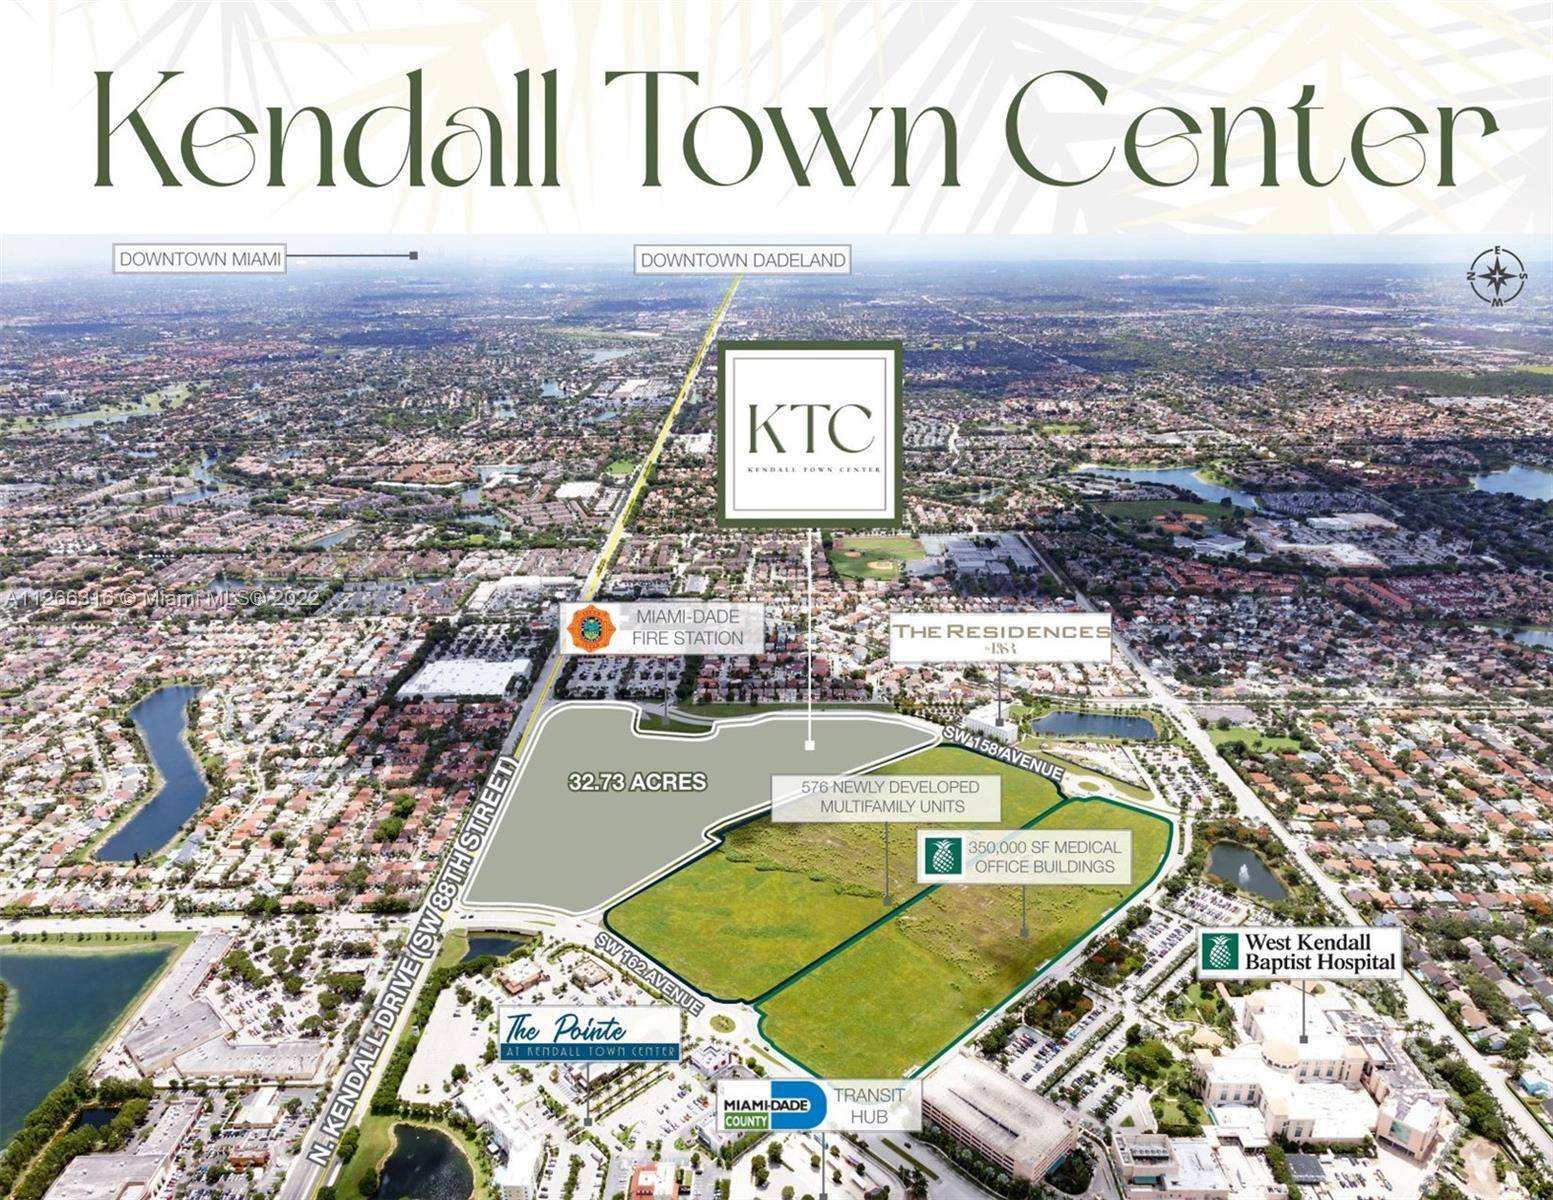 Kendall Town Center KTC is the last remaining sizable commercial parcel in Miami suitable for a major mixed use development.